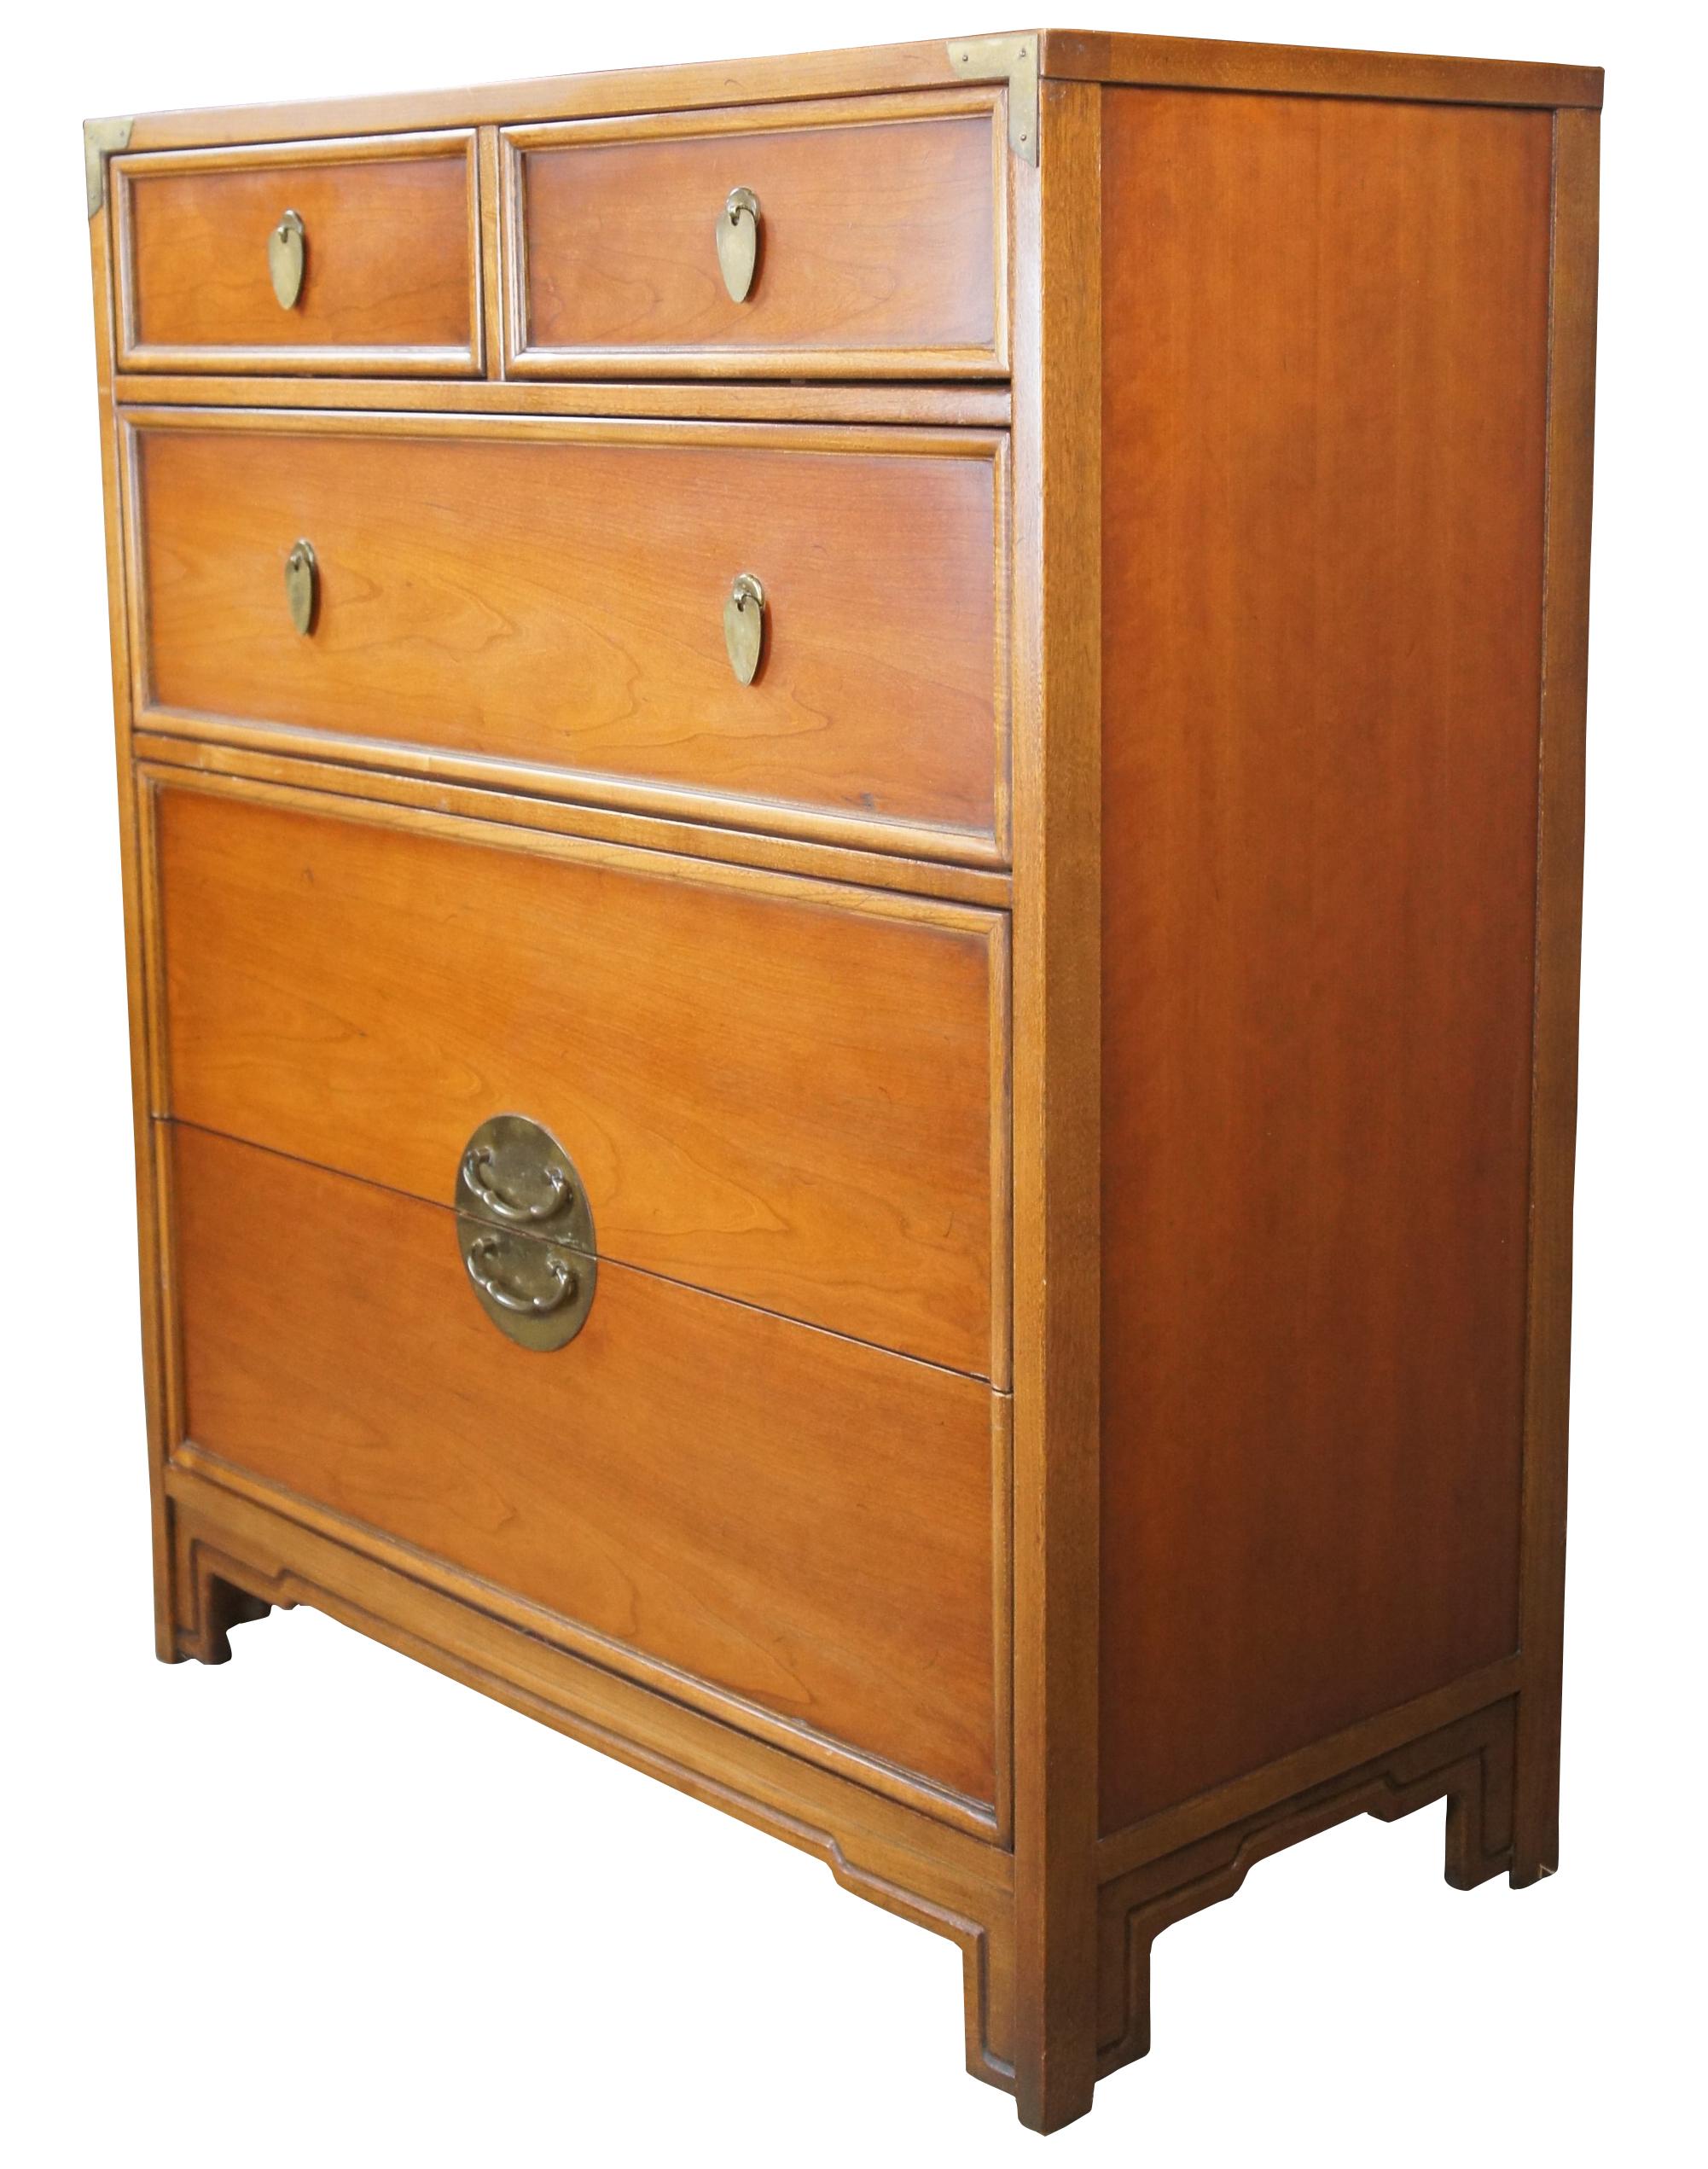 A beautiful highboy or chest of drawer from the 